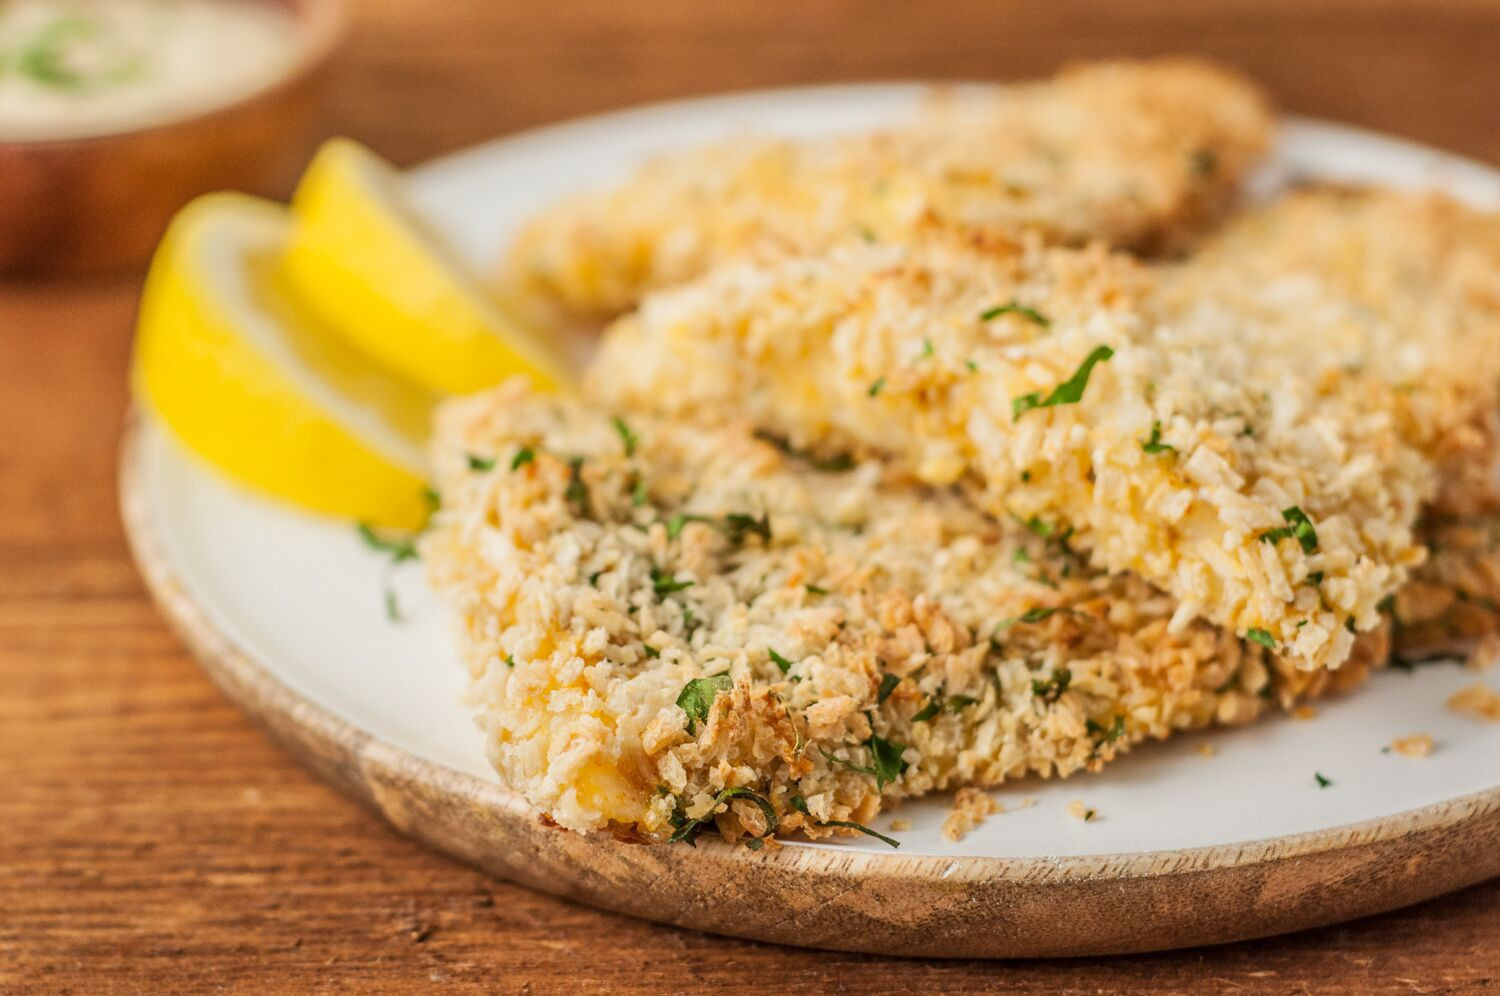 Recipes For Baked Fish Fillets
 Baked Panko Crusted Fish Fillets Recipe